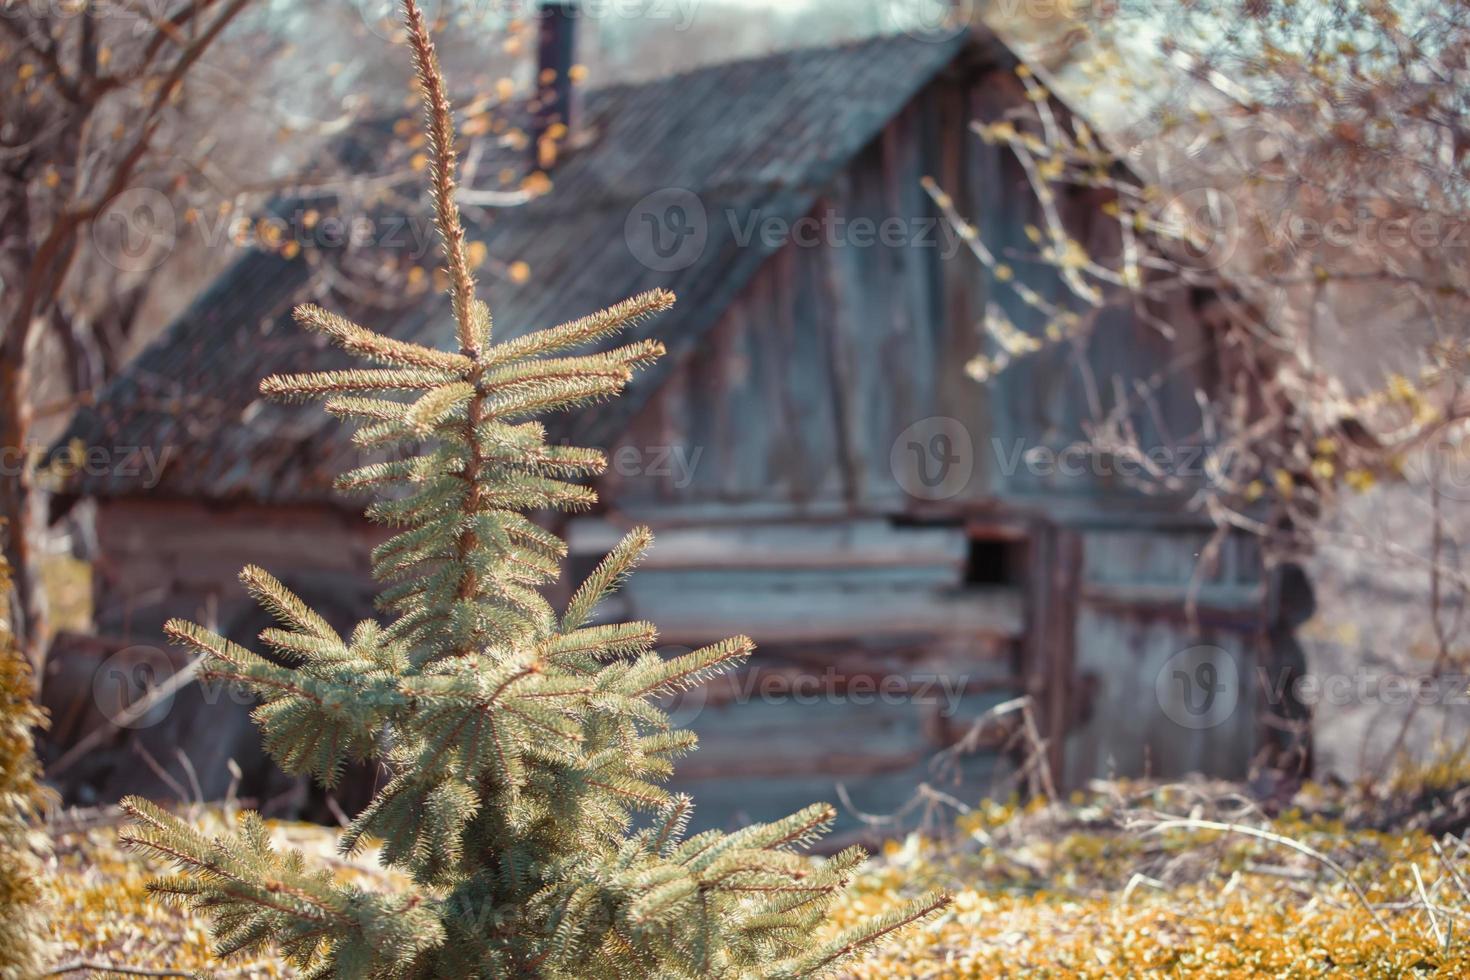 Behind the Christmas tree is an old abandoned wooden house. photo